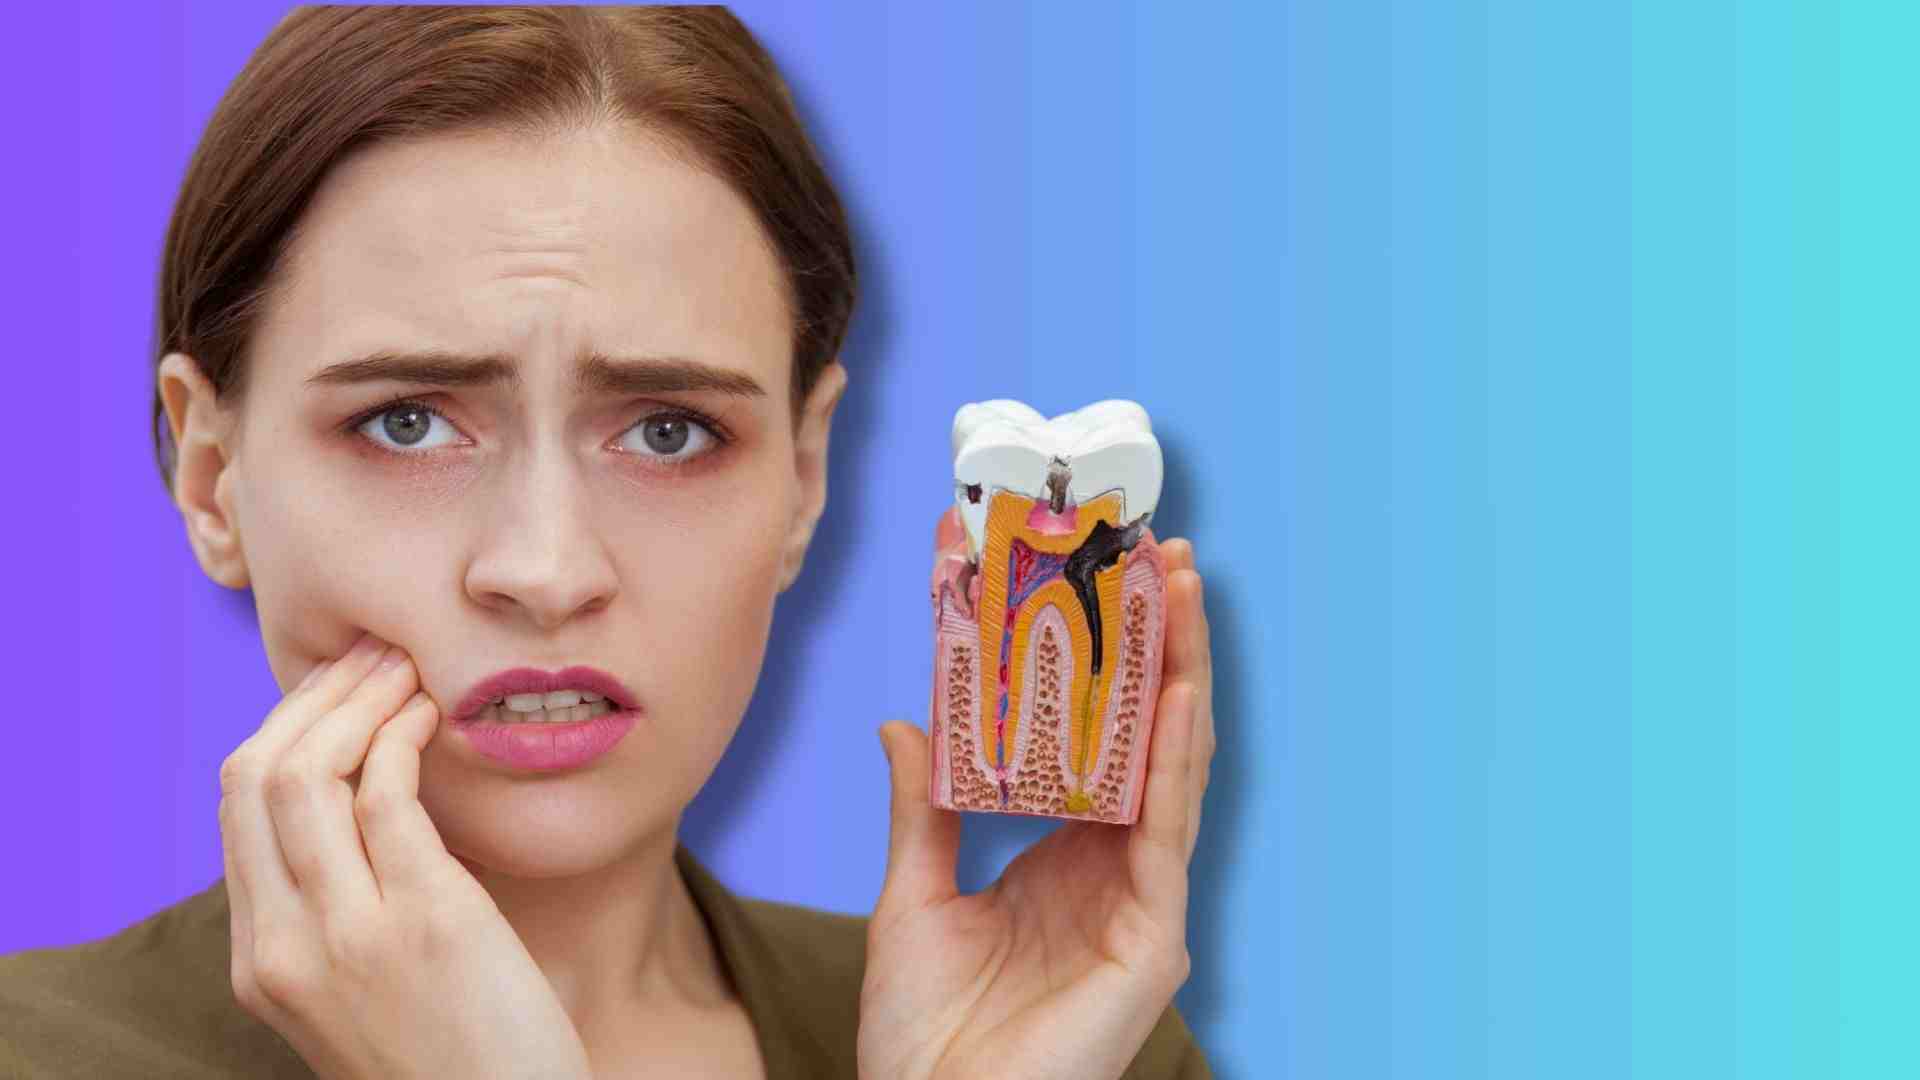 A woman holding a tooth decay model